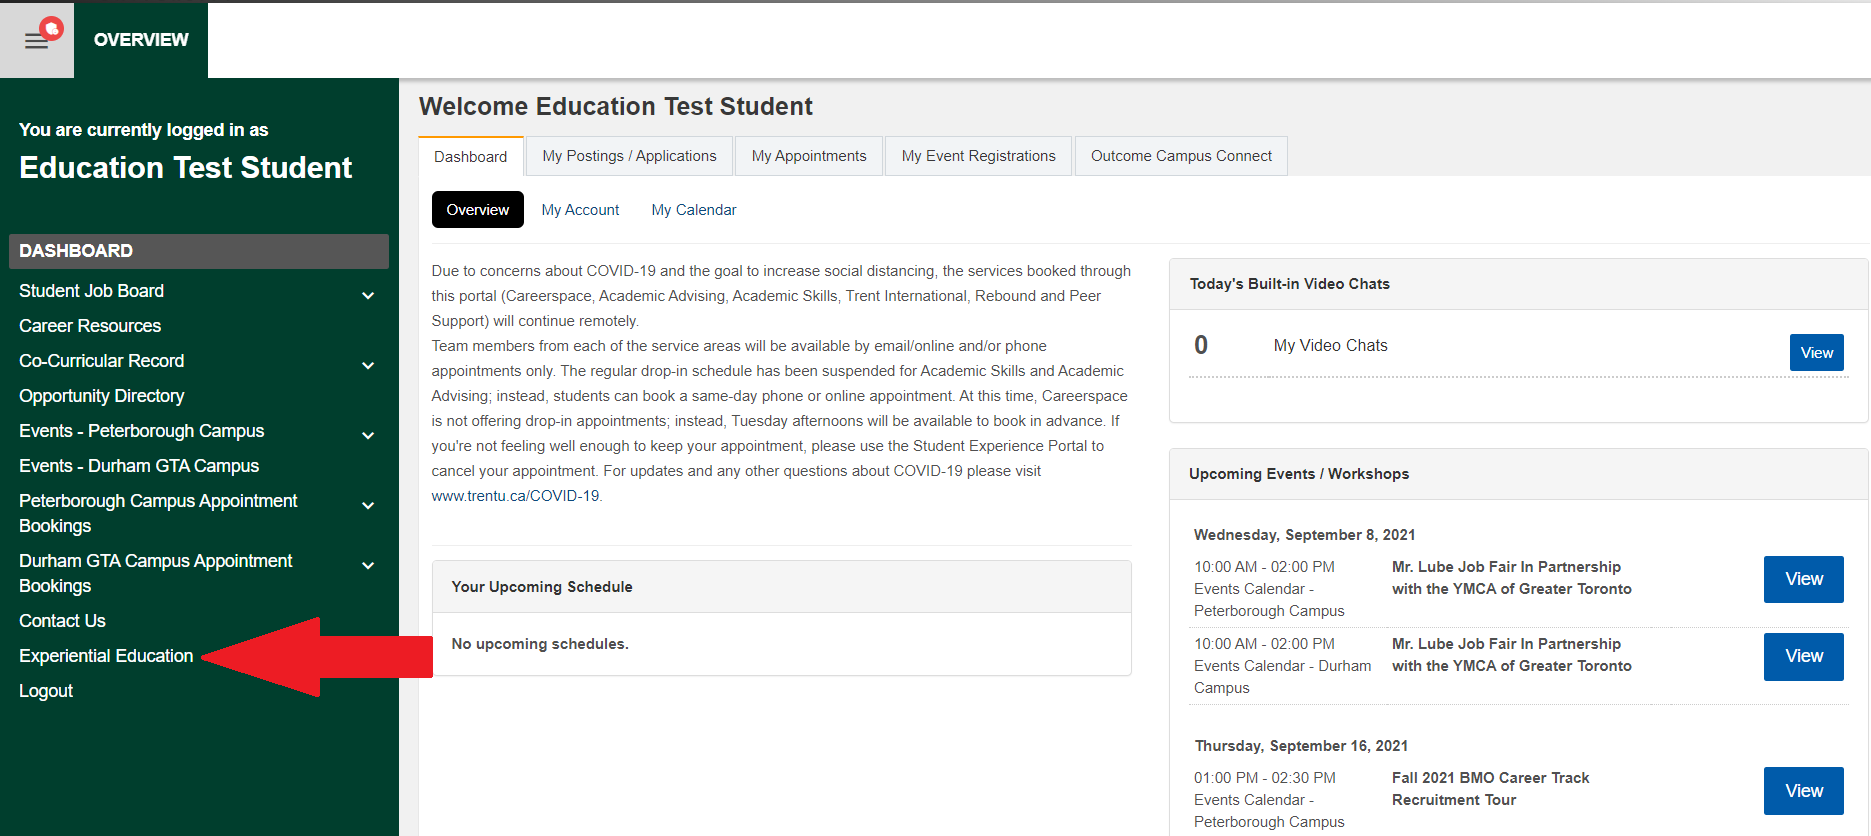 Screenshot of the student dashboard in the student experience portal with a red arrow pointing to "Experiential Education" on the navigation panel to the left of the screen.